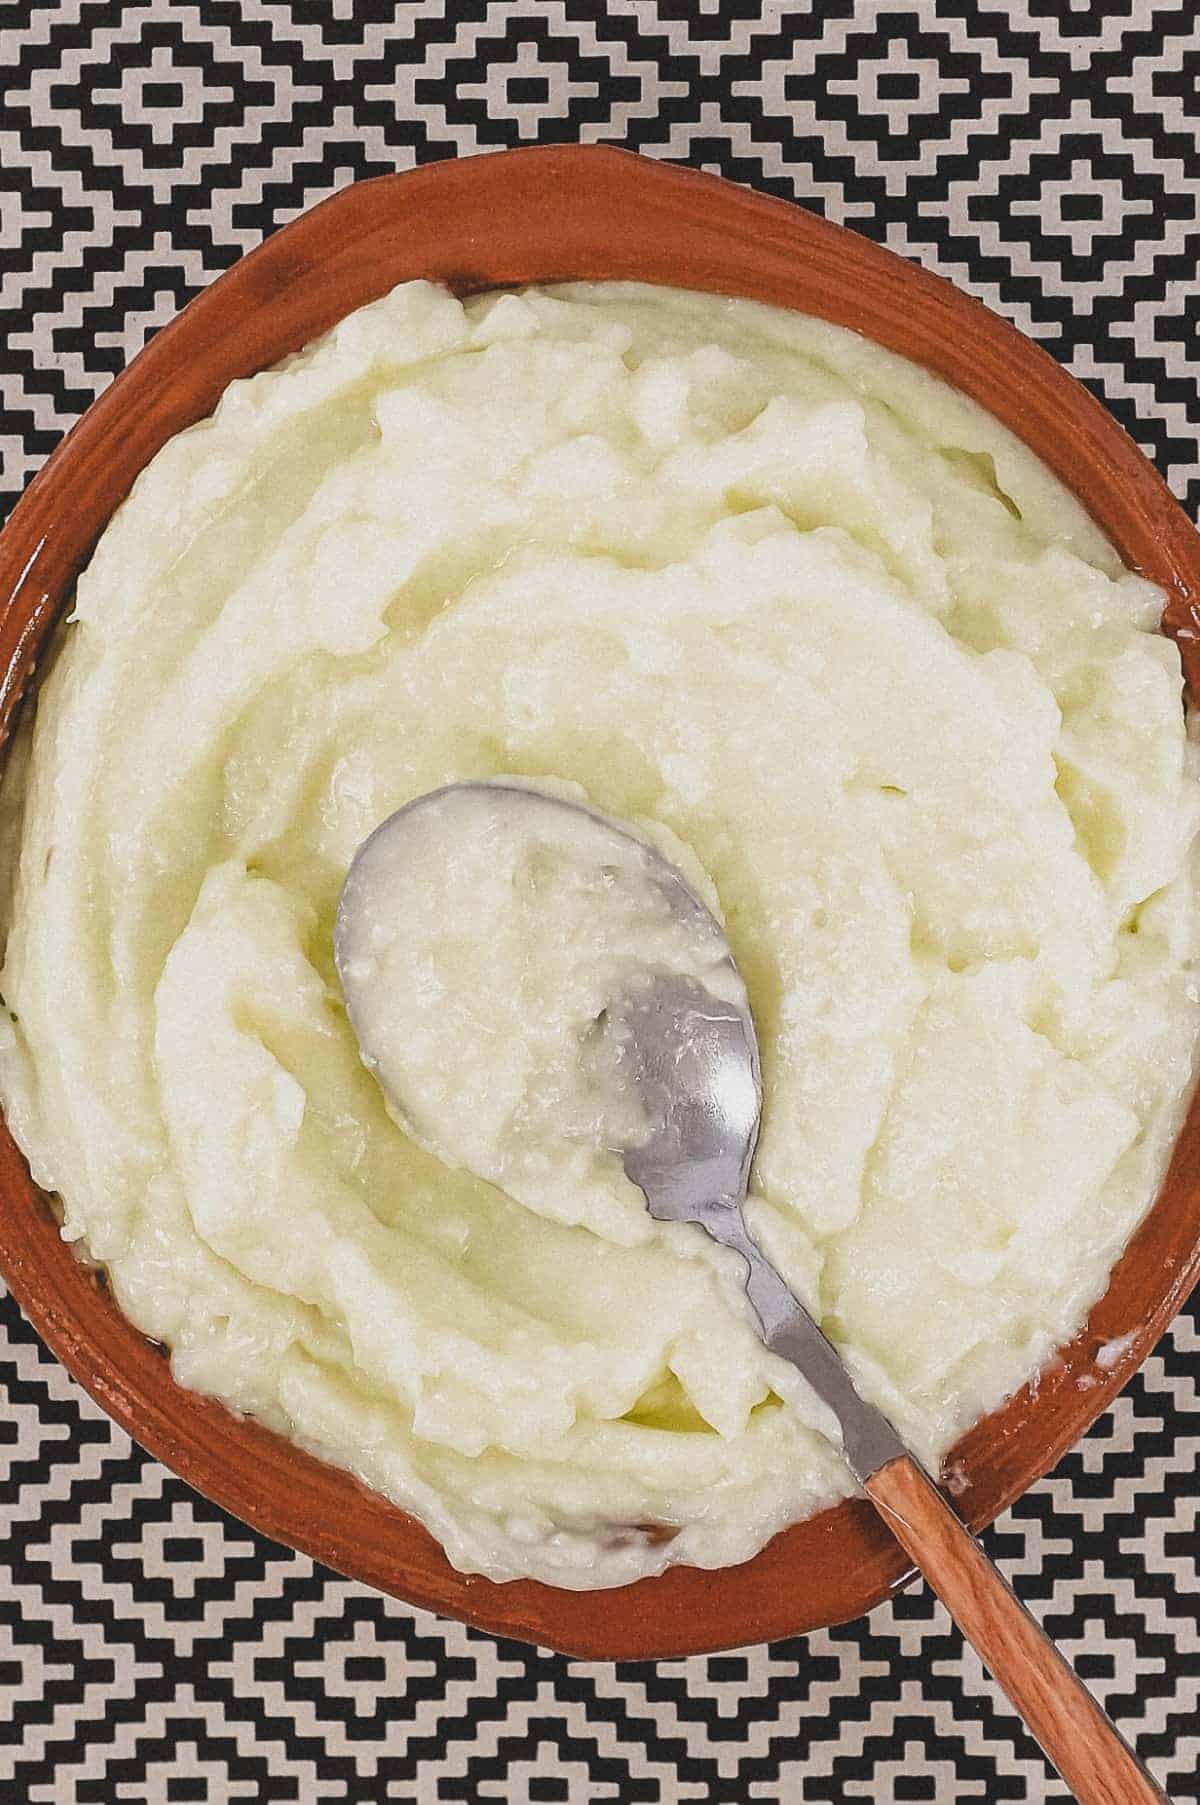 A small bowl of Lebanese garlic sauce, Toum with a spoon